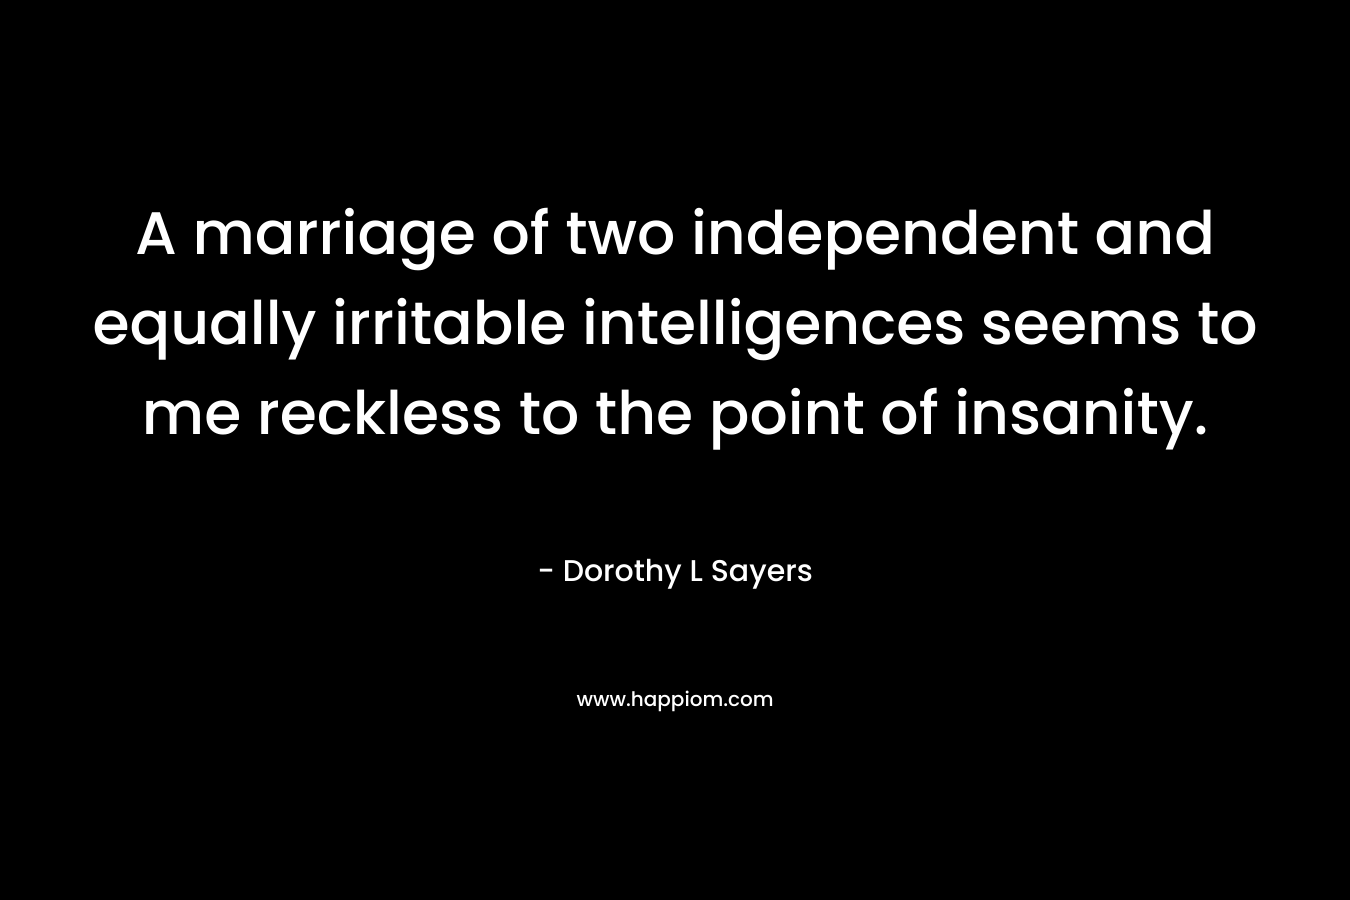 A marriage of two independent and equally irritable intelligences seems to me reckless to the point of insanity. – Dorothy L Sayers